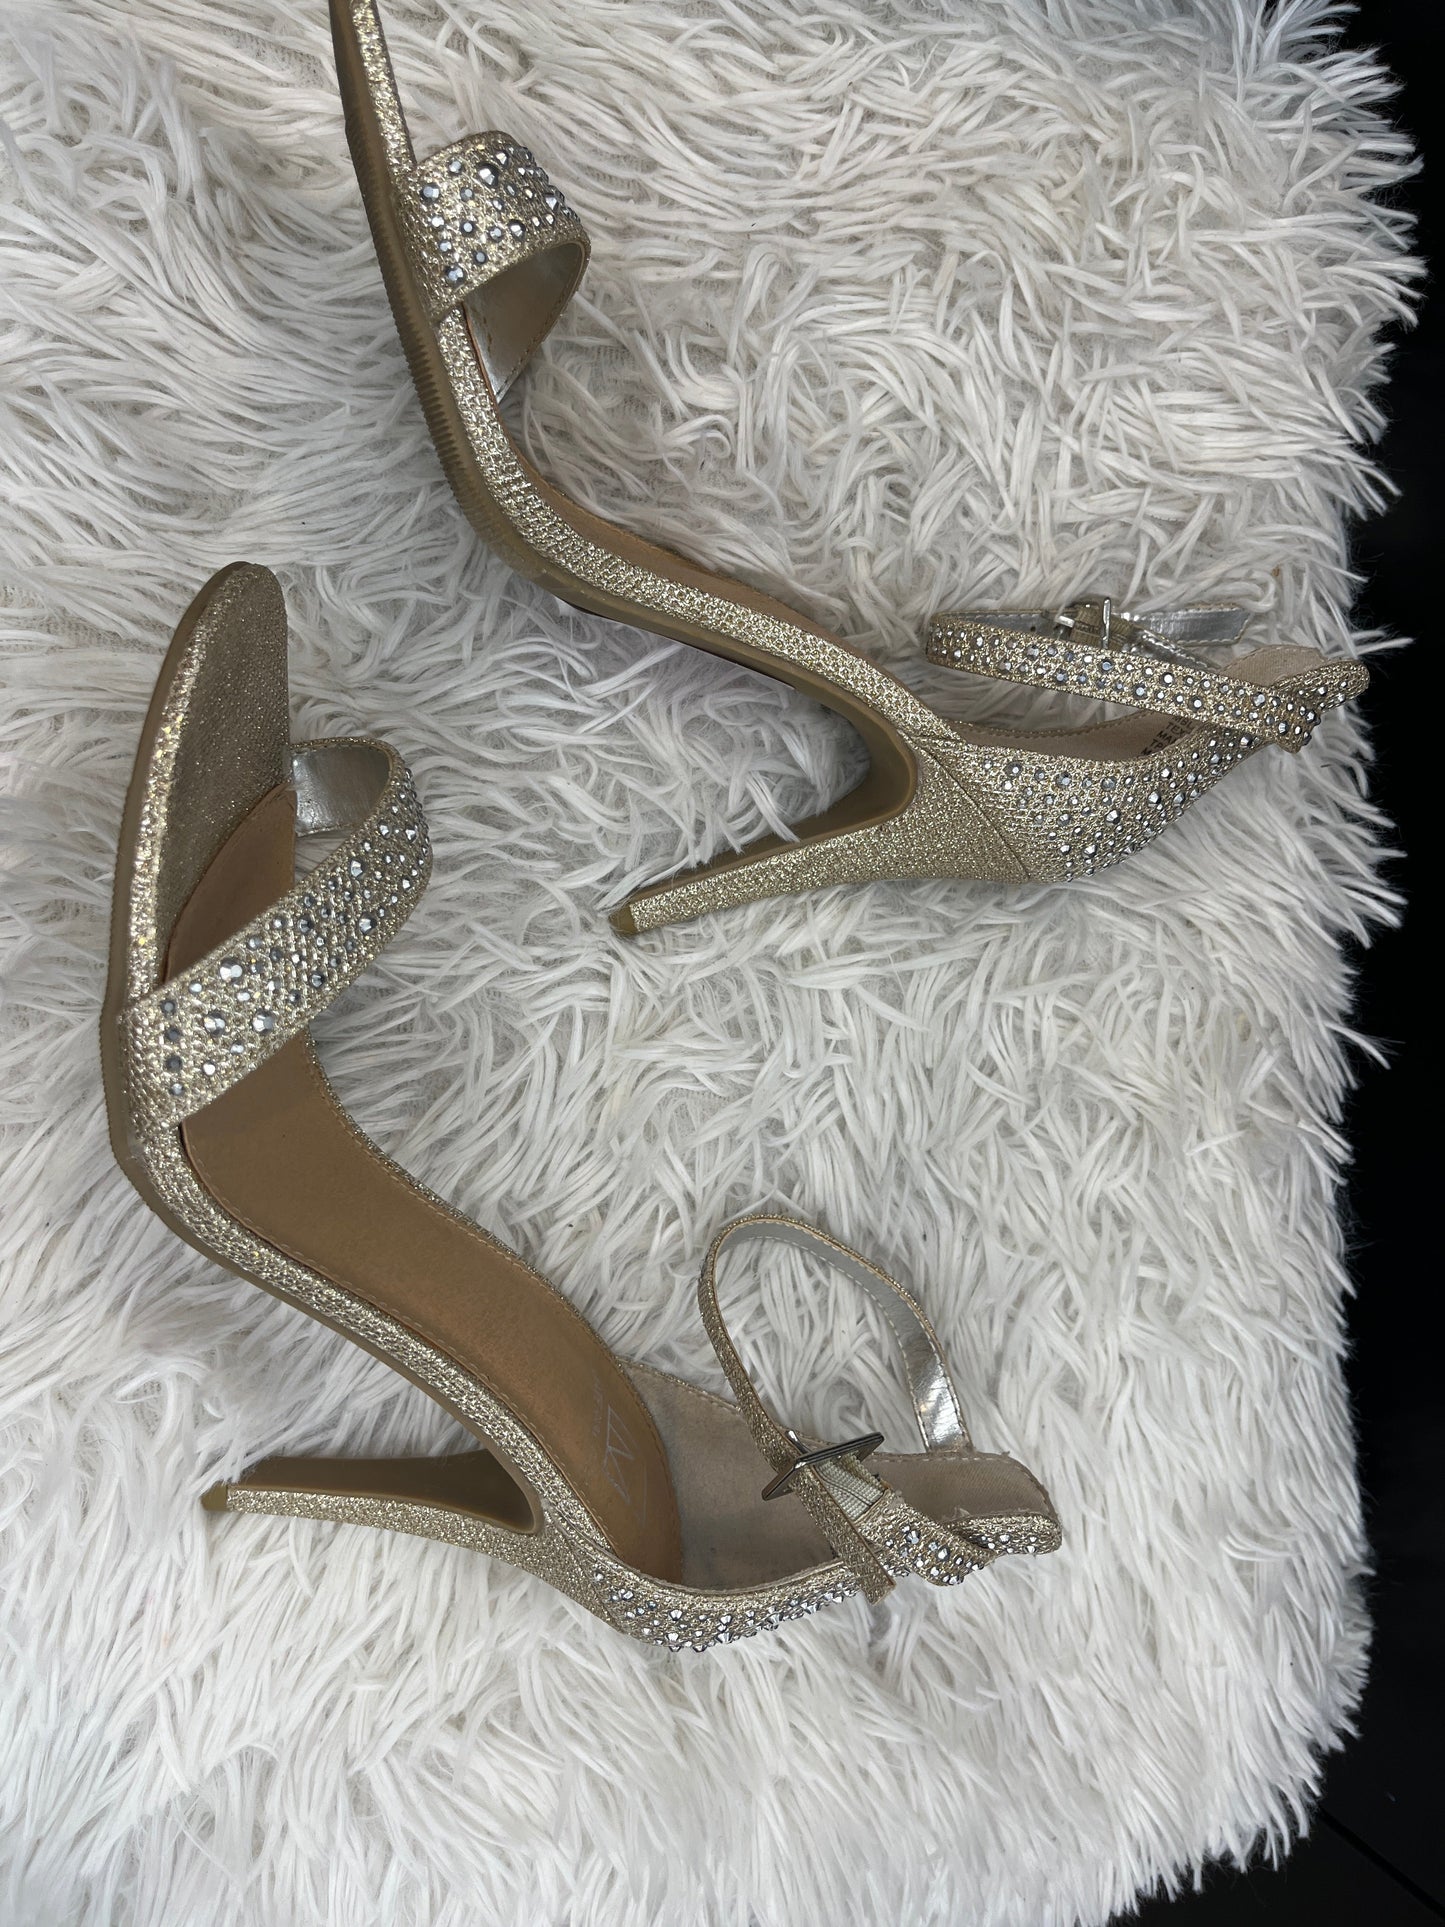 Diamond Shoes Heels Stiletto Material Girl, Size 7